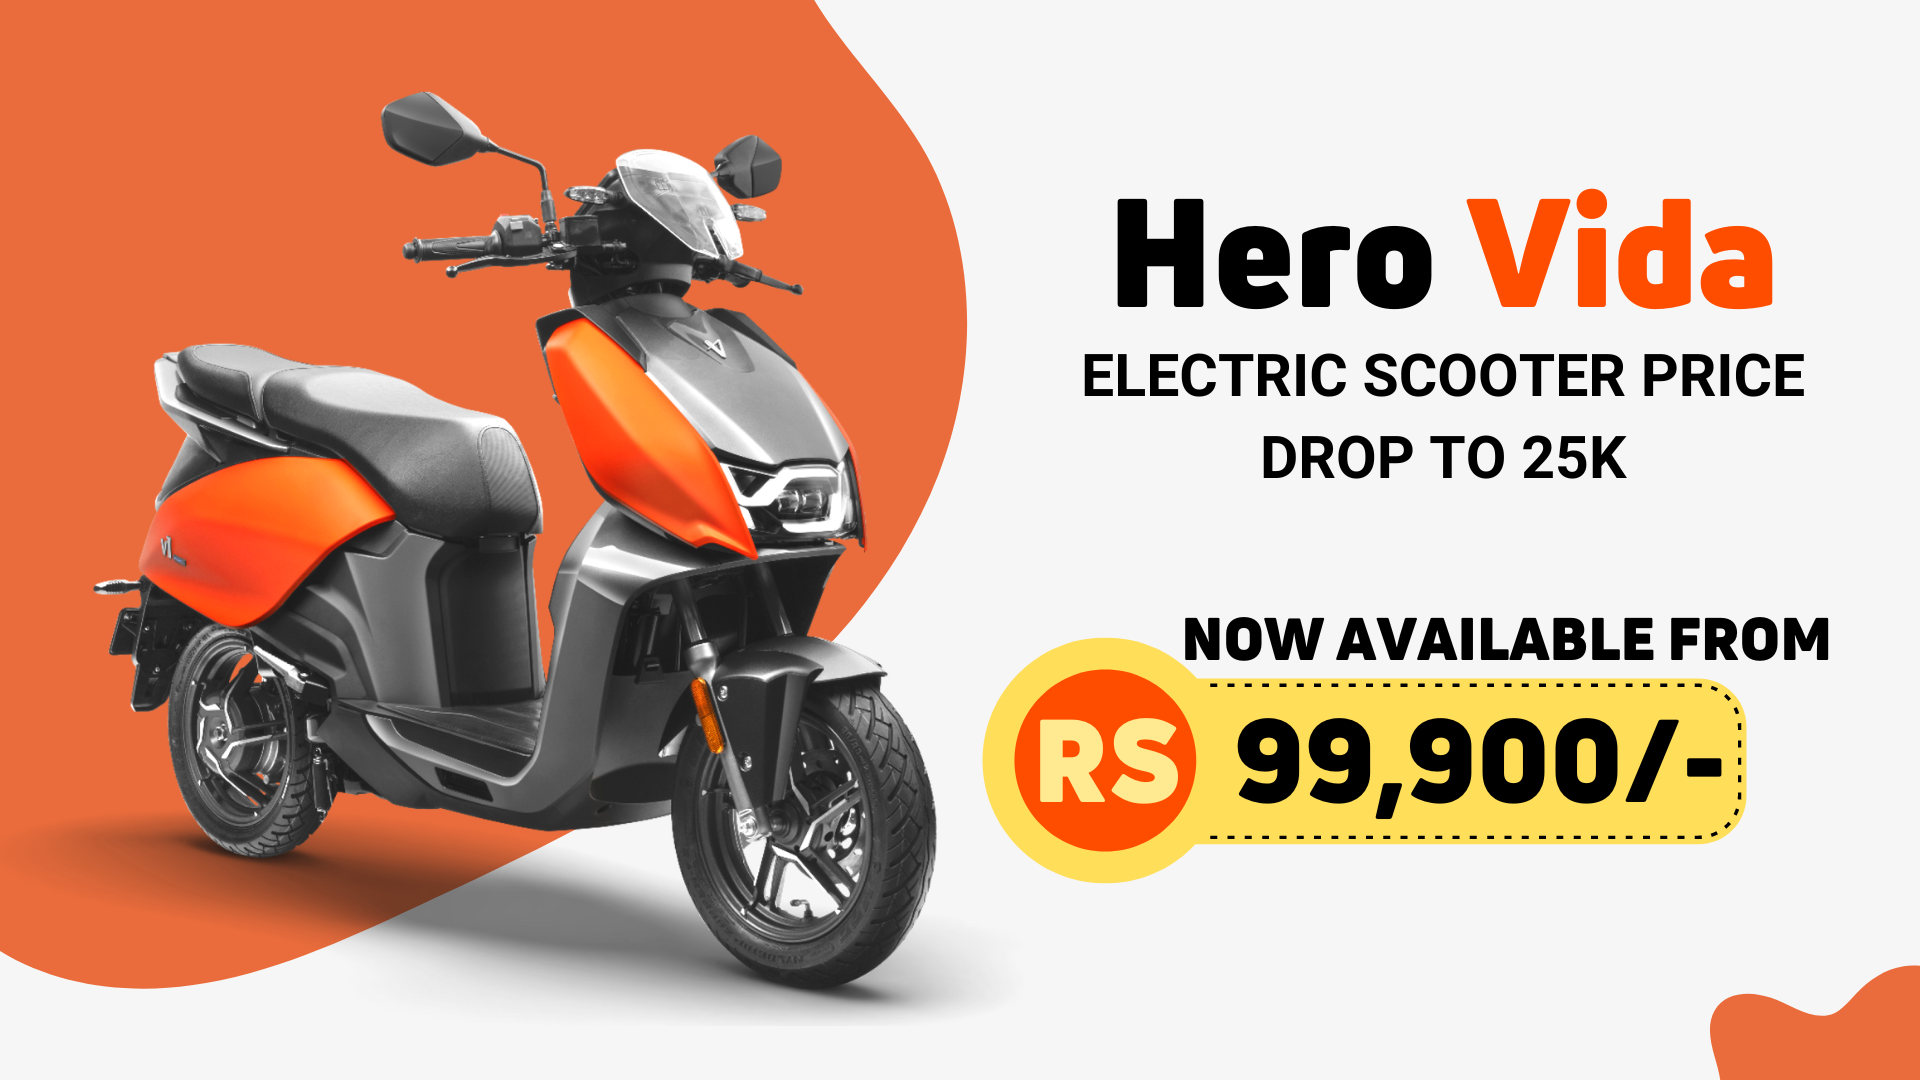 https://e-vehicleinfo.com/hero-vida-electric-scooter-price-drop-to-25k-now-available-from-rs-99900/